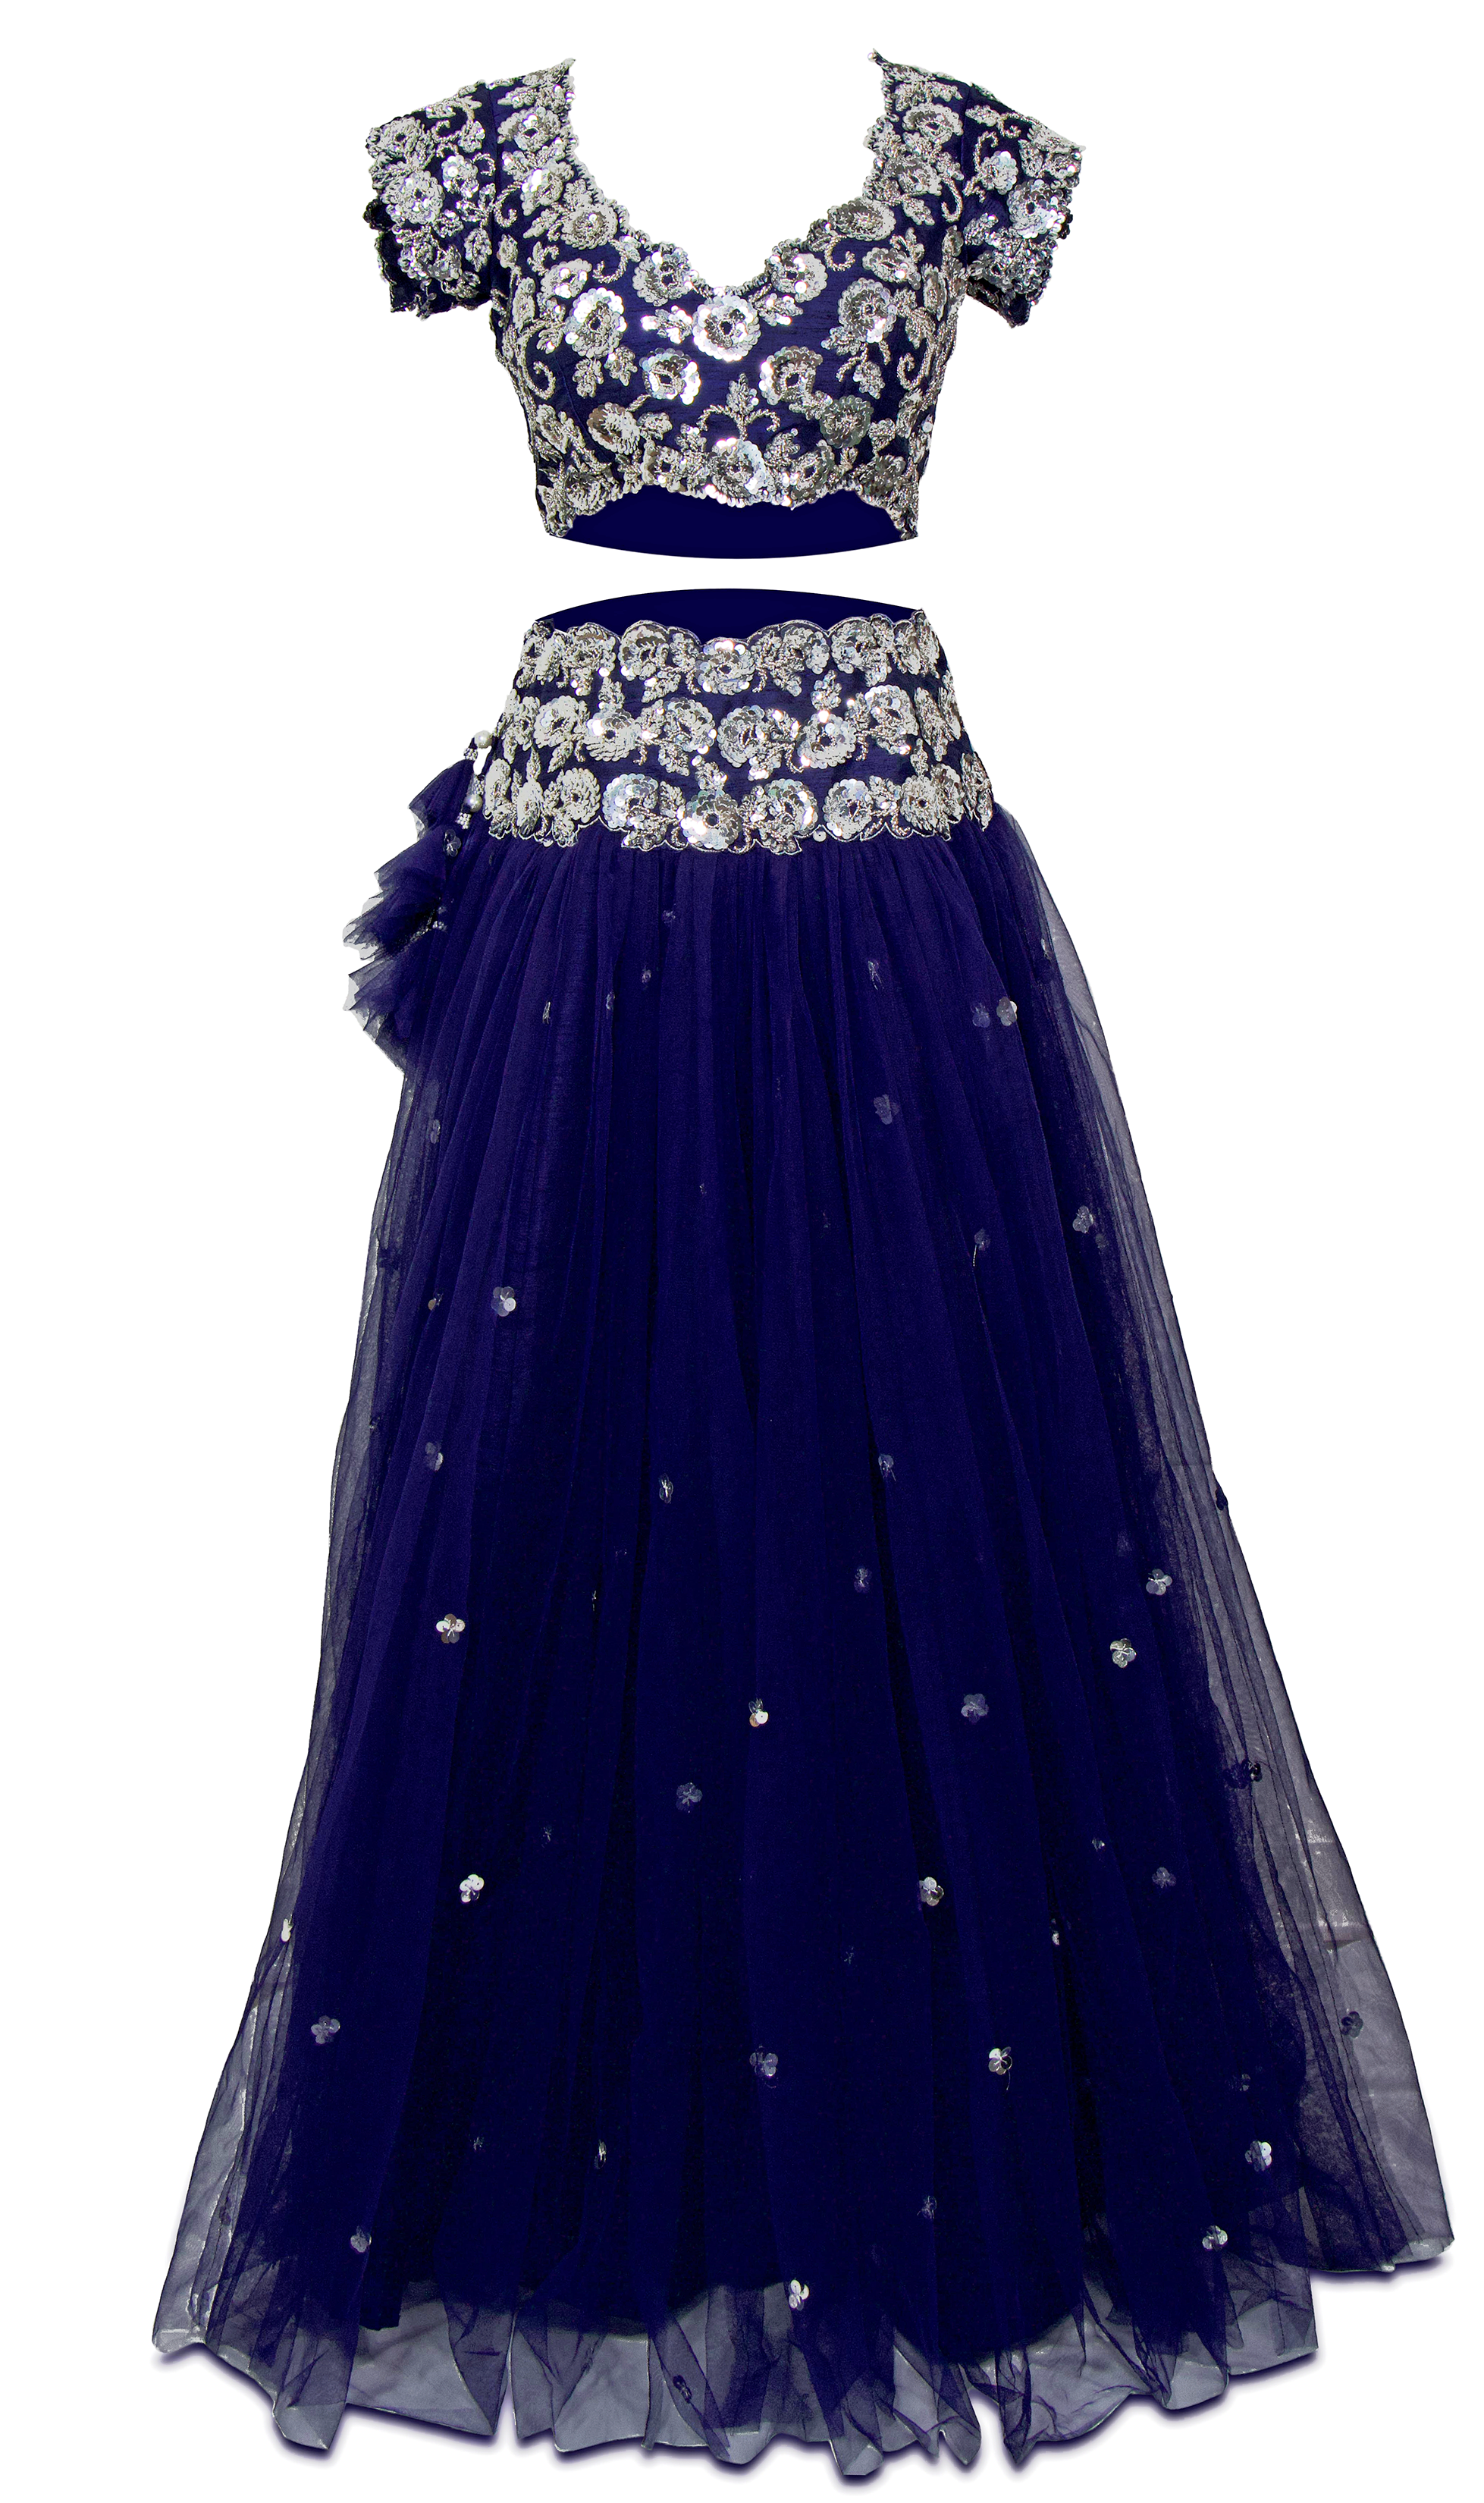 Midnight blue lehenga paired with a matching lehenga in tulle base and dupatta.